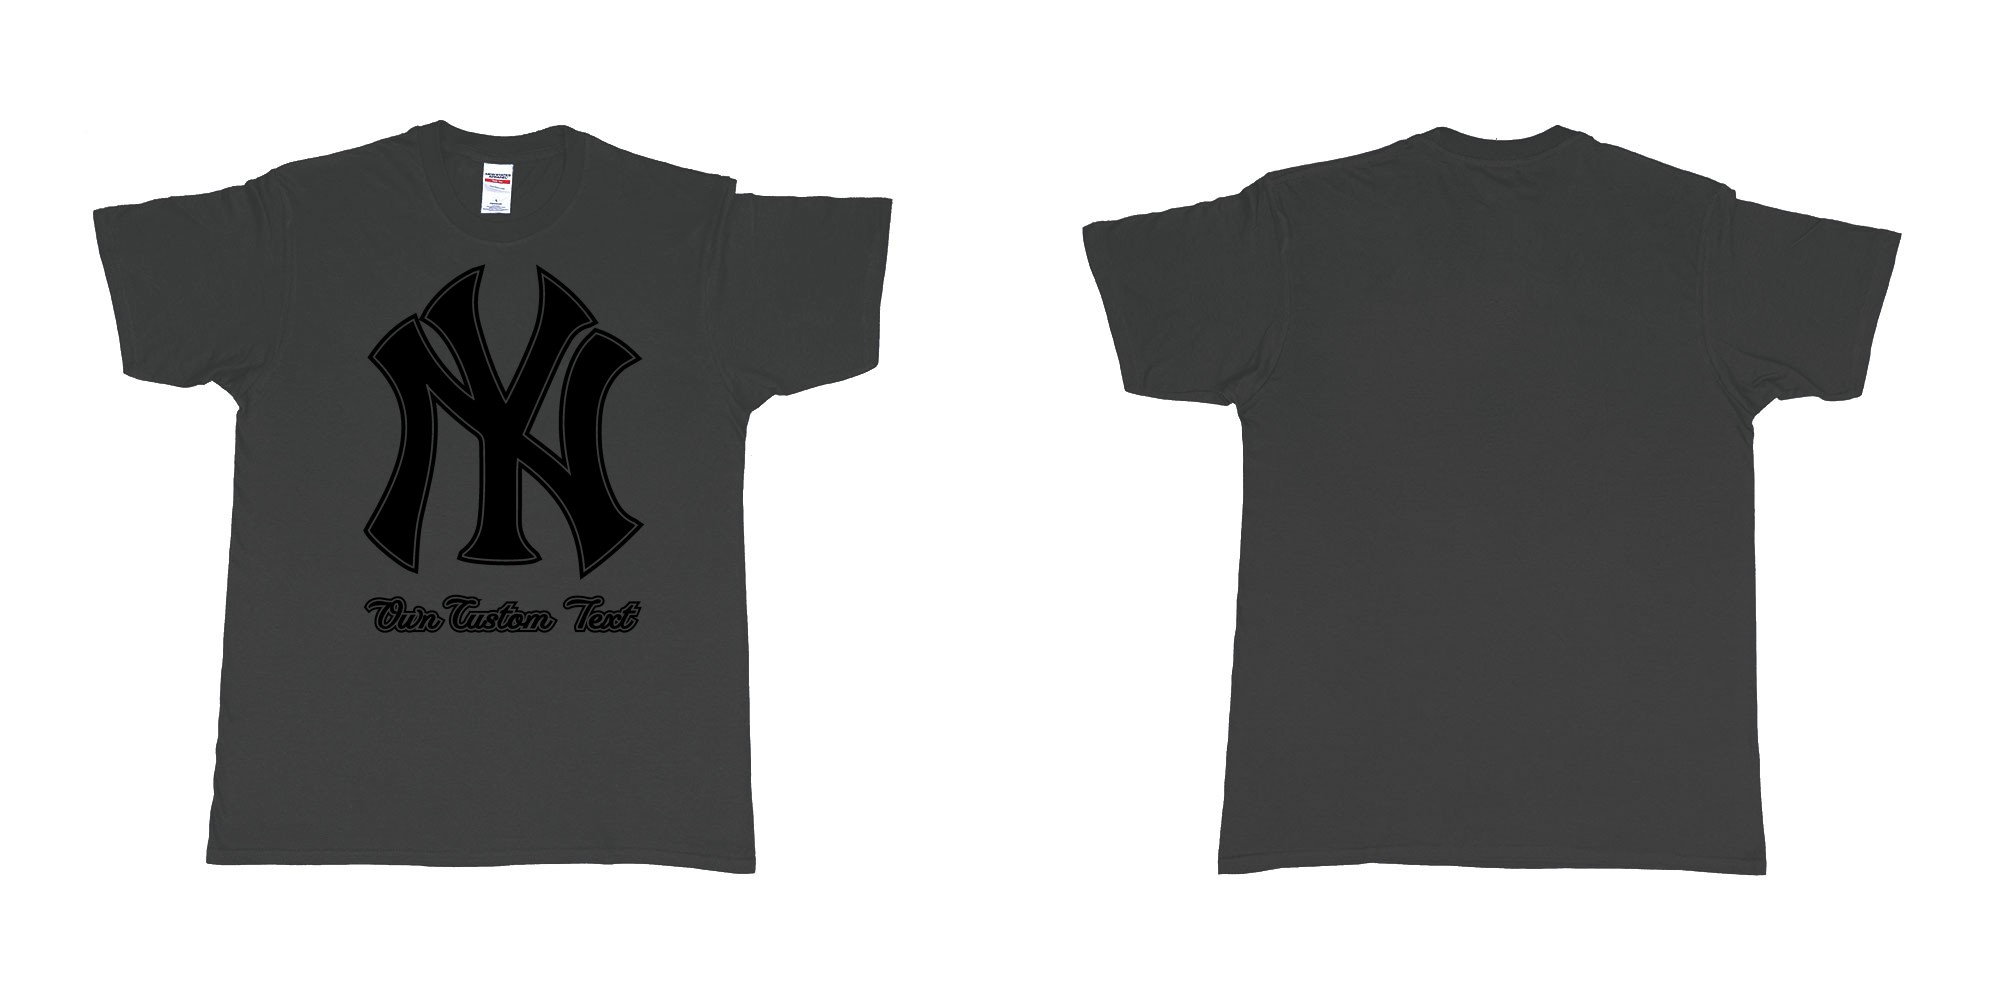 Custom tshirt design new york yankees baseball team custom design in fabric color black choice your own text made in Bali by The Pirate Way